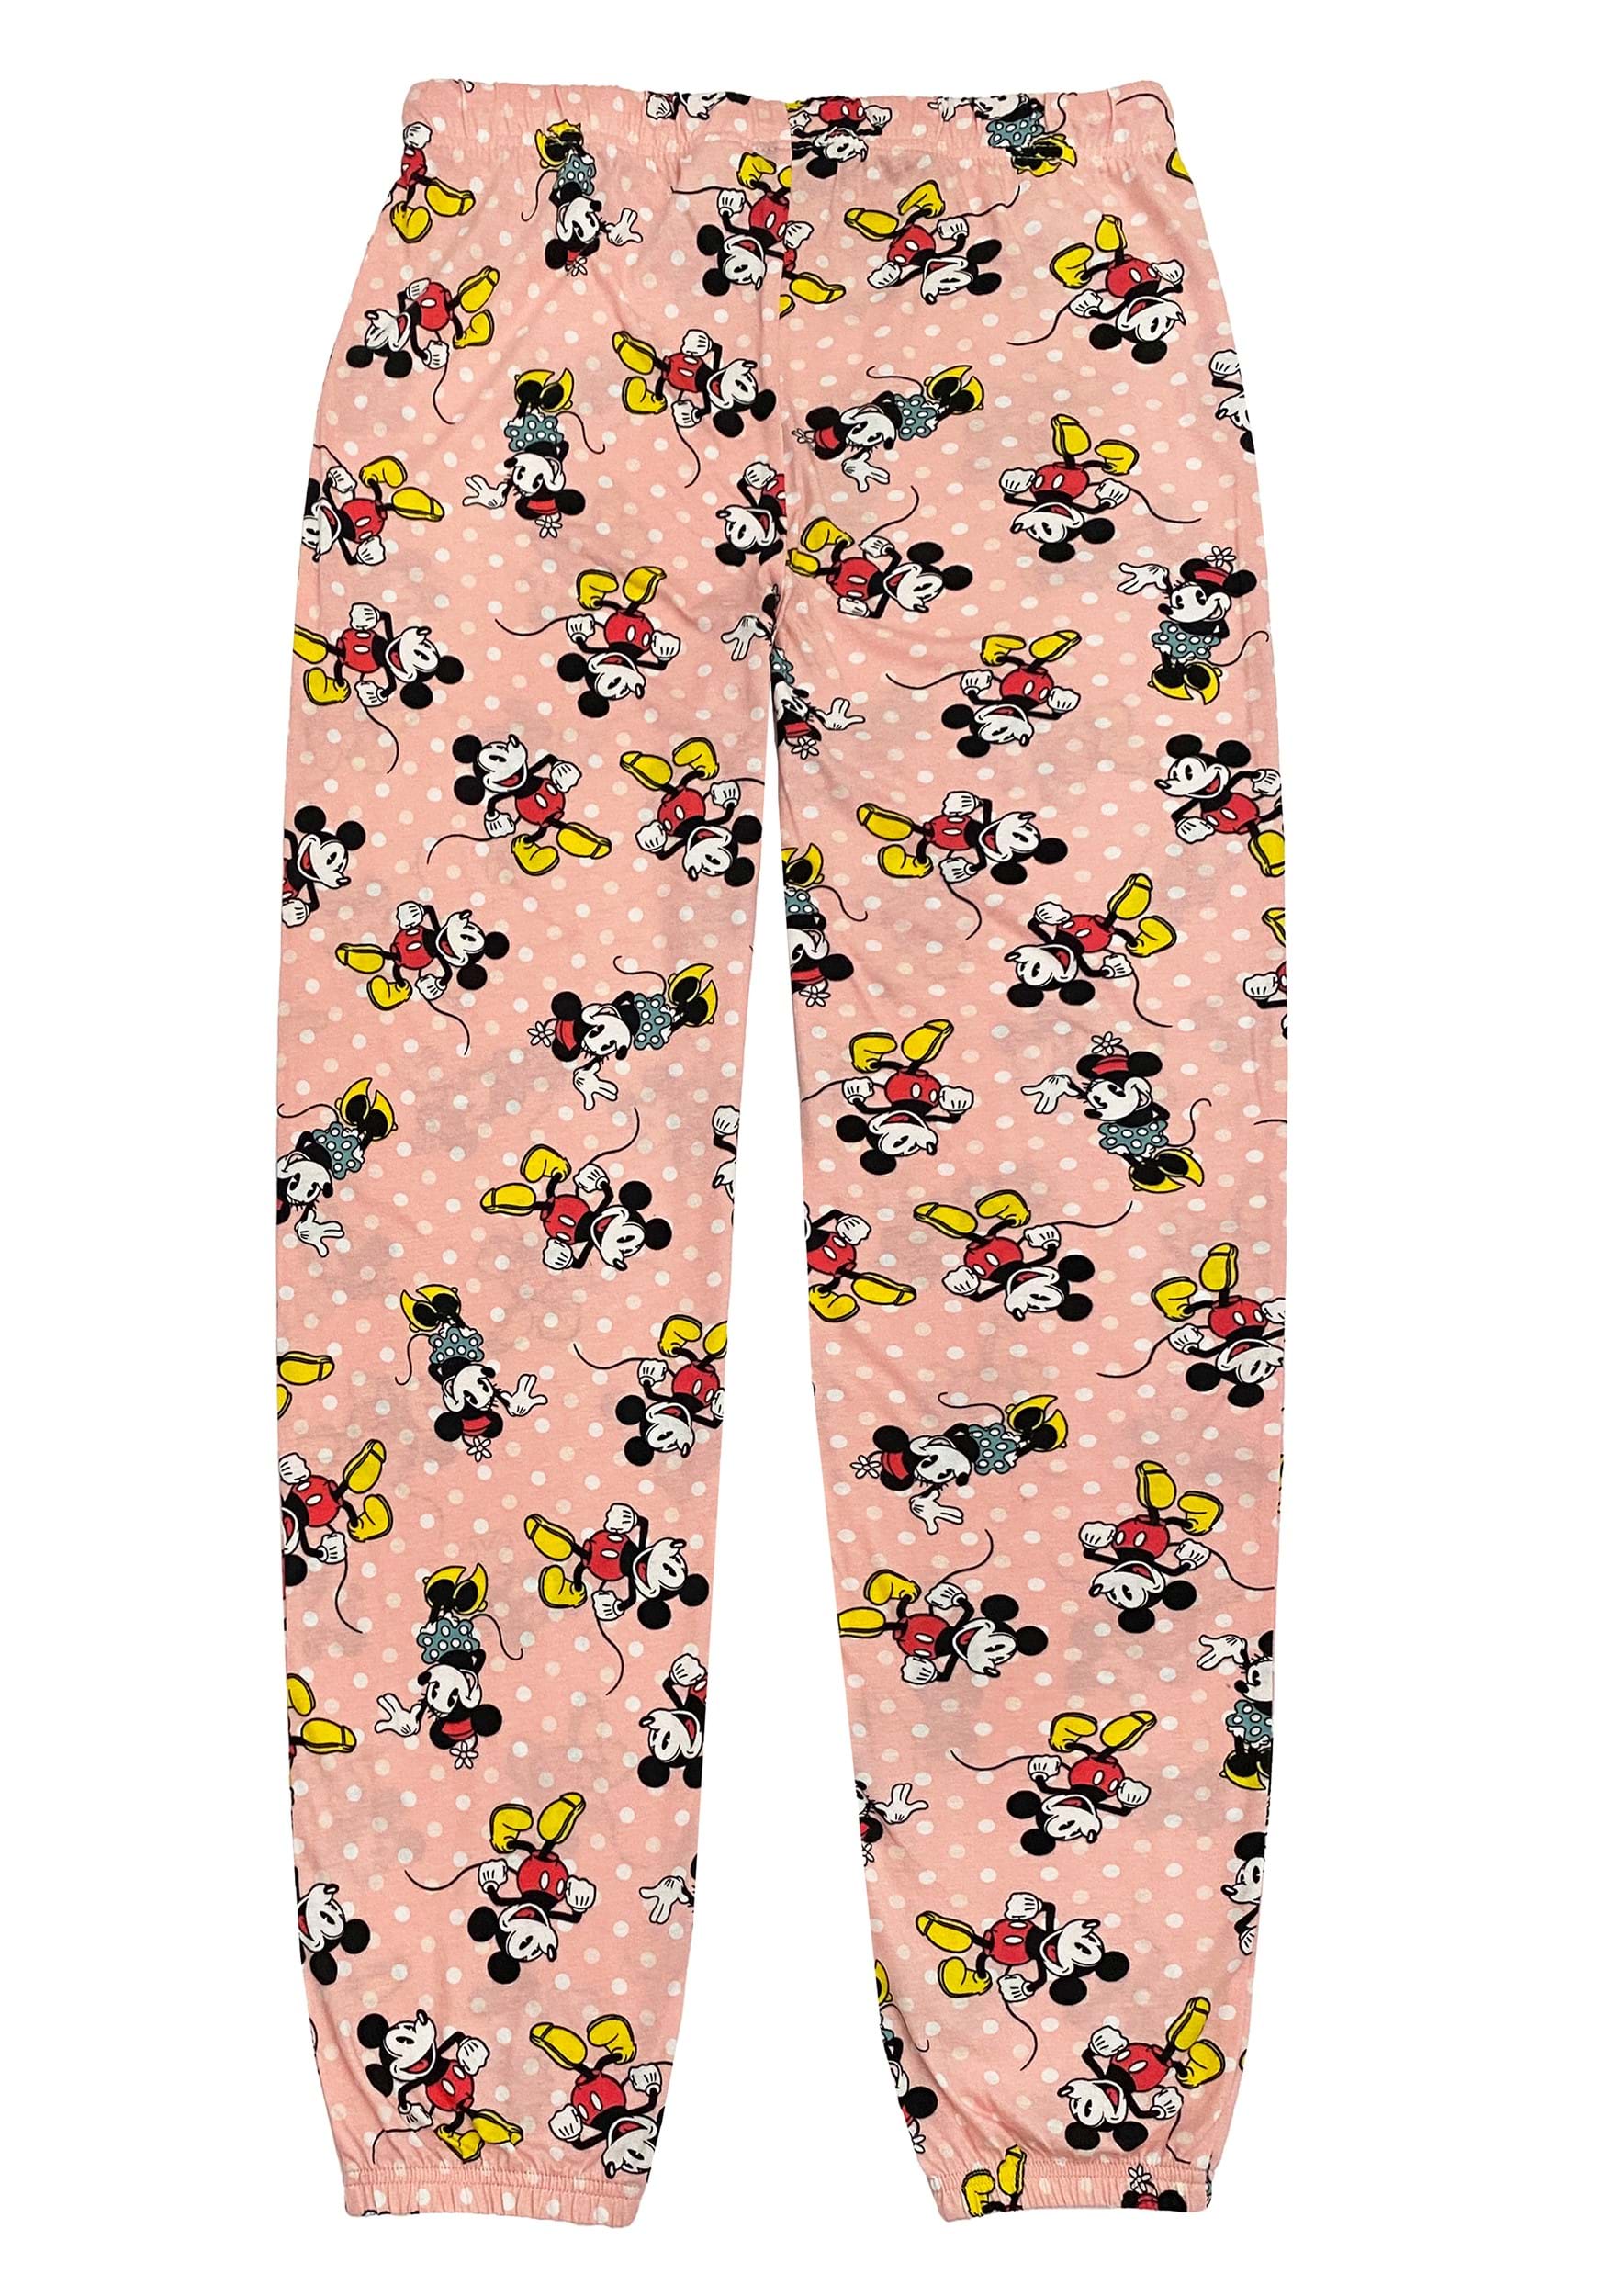 Women's Disney All Over Mickey Mouse Joggers